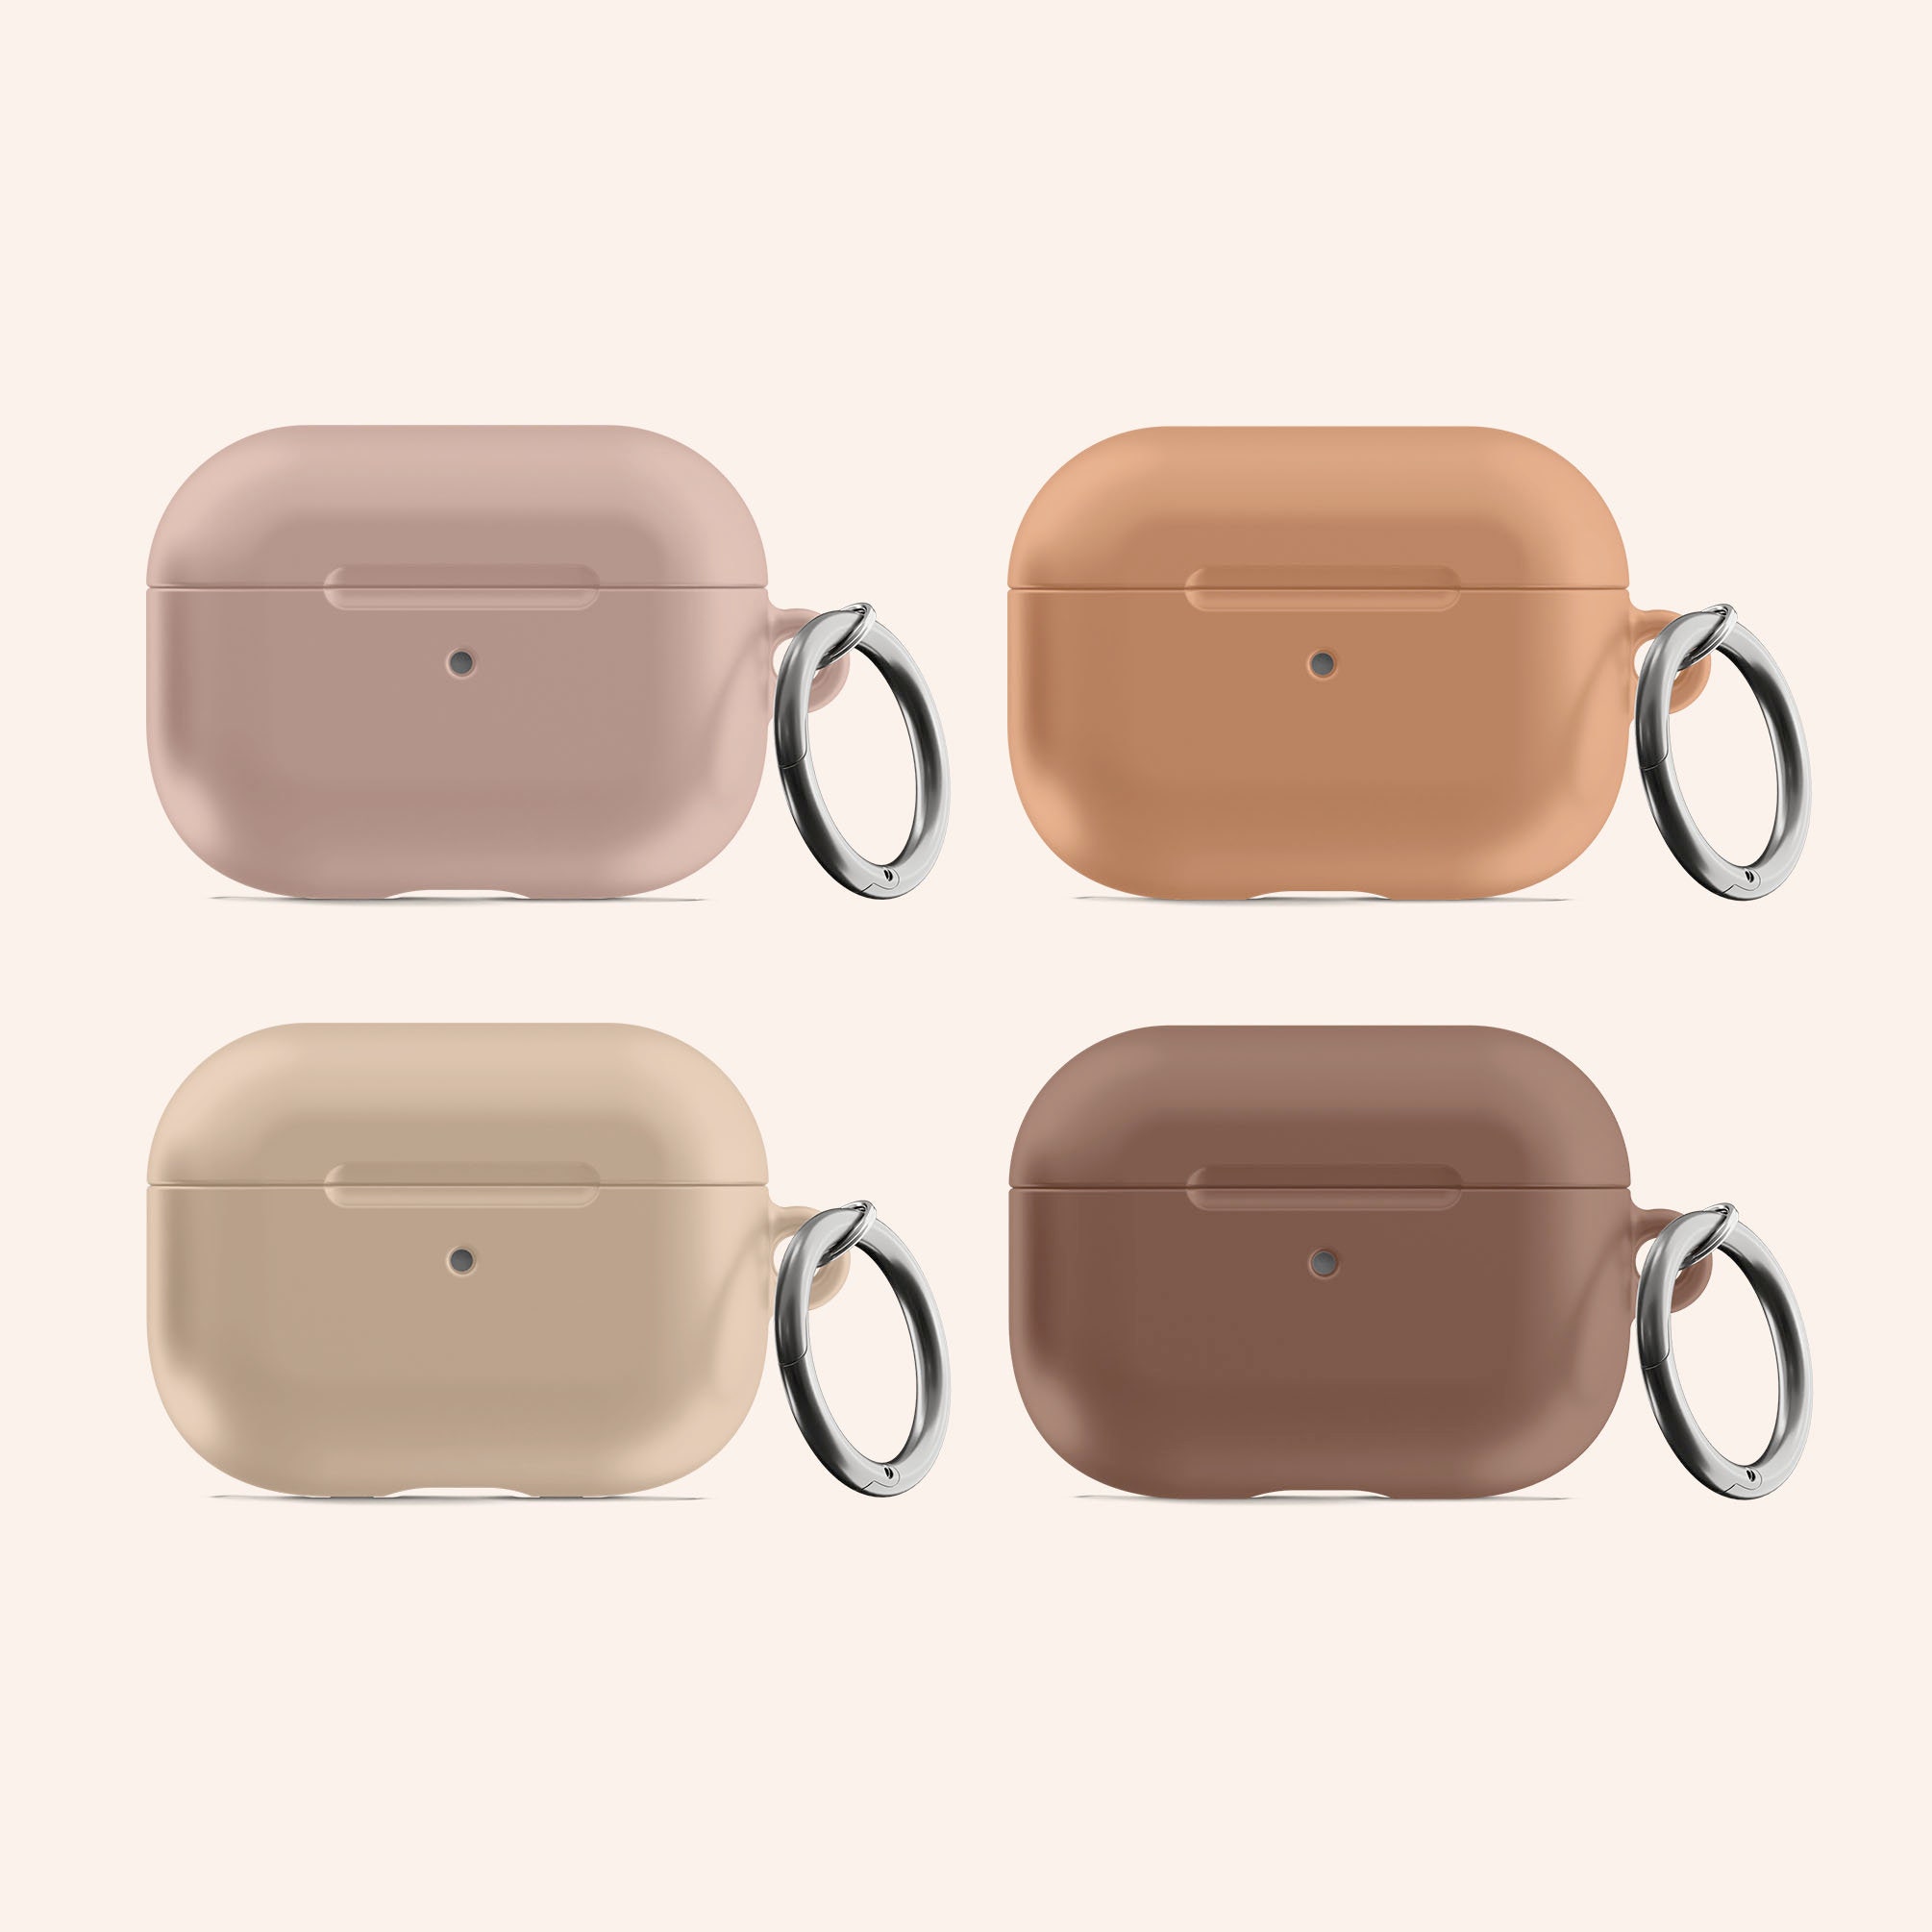 AirPods Case in Taupe - XOUXOU®